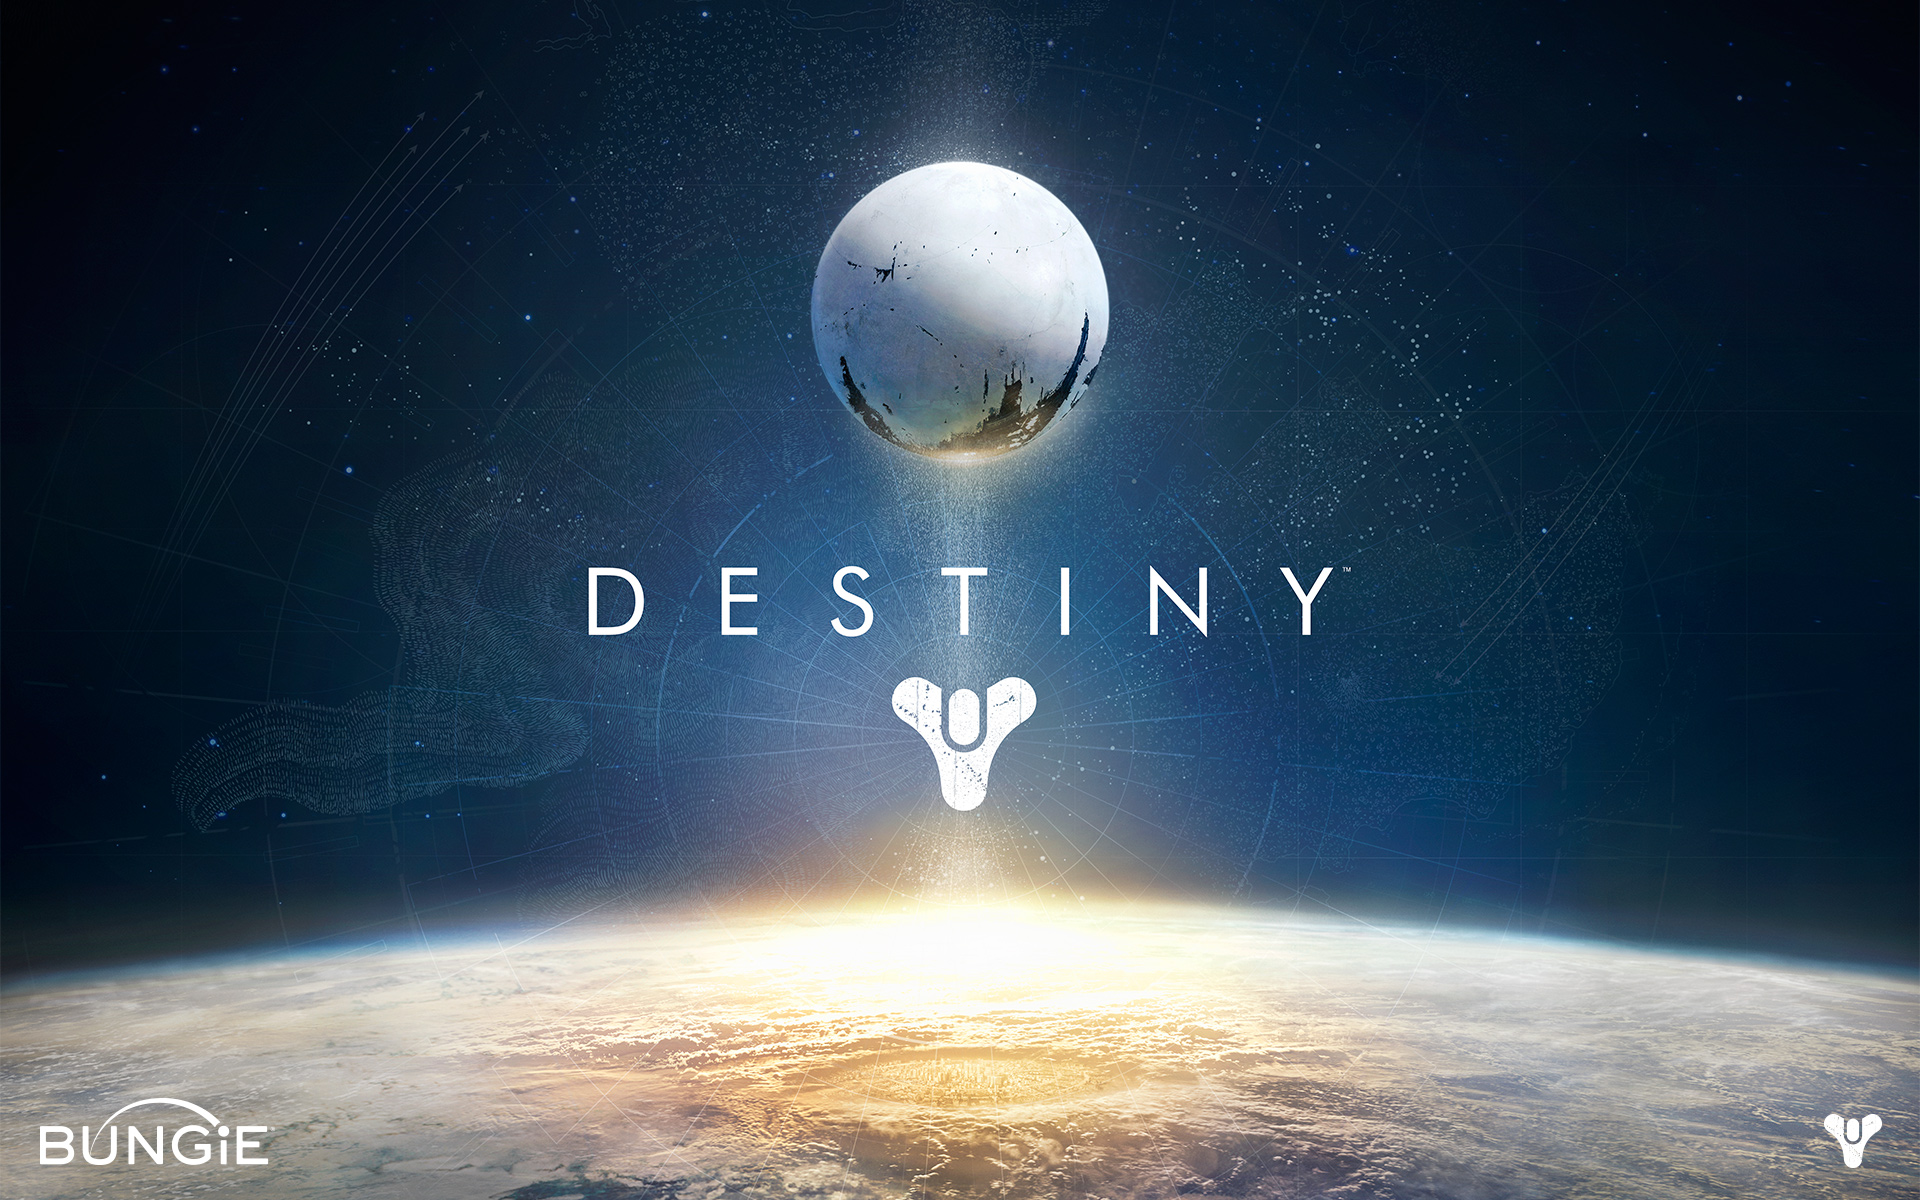 Destiny pre-order deals for labor day weekend